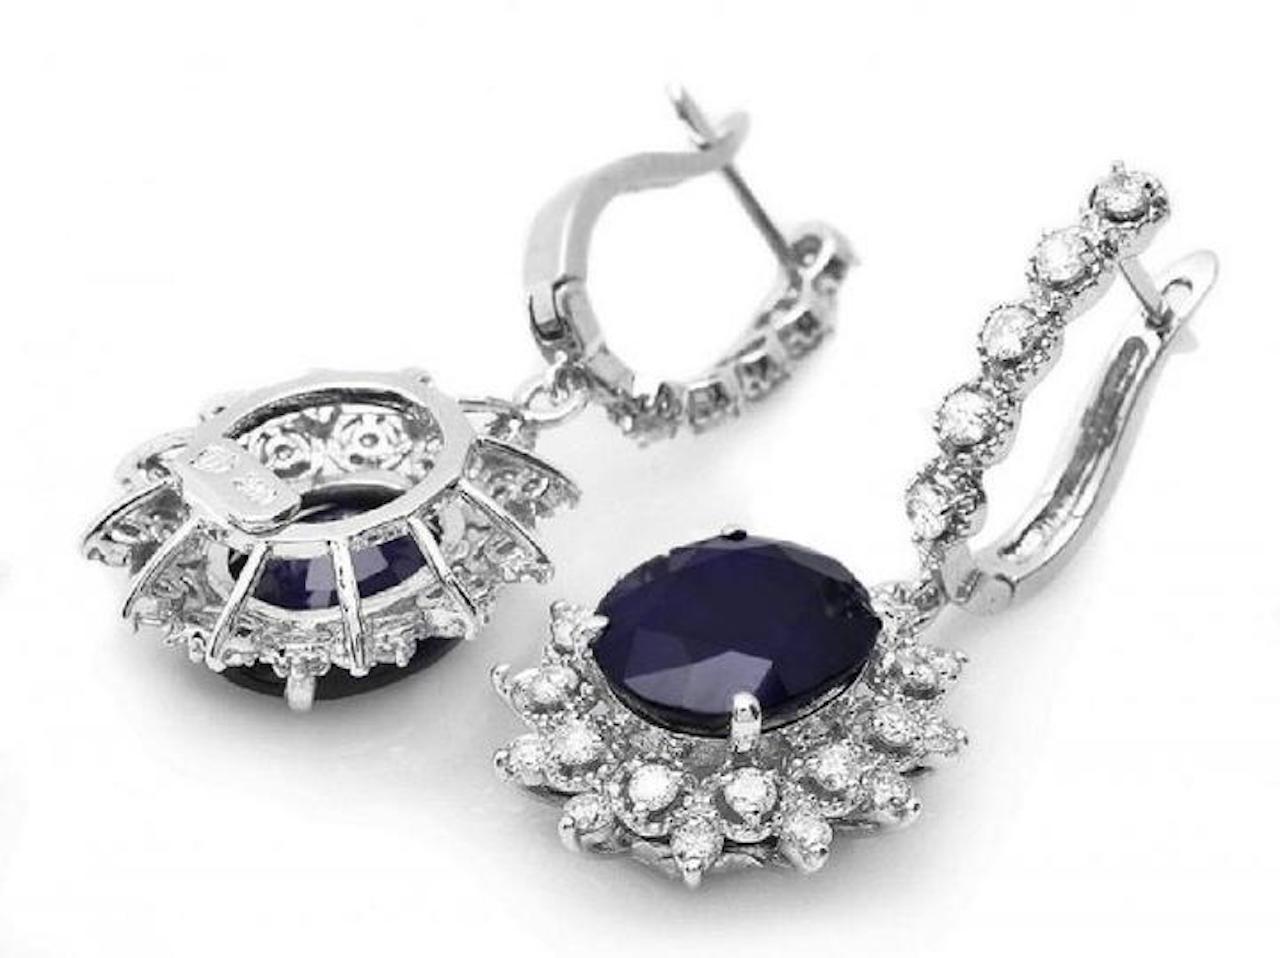 Exquisite 11.40 Carats Natural Sapphire and Diamond 14K Solid White Gold Earrings

Amazing looking piece!

Total Natural Round Cut White Diamonds Weight: Approx. 1.40 Carats (color G-H / Clarity SI1-SI2)

Total Natural Oval Cut Sapphires Weight: